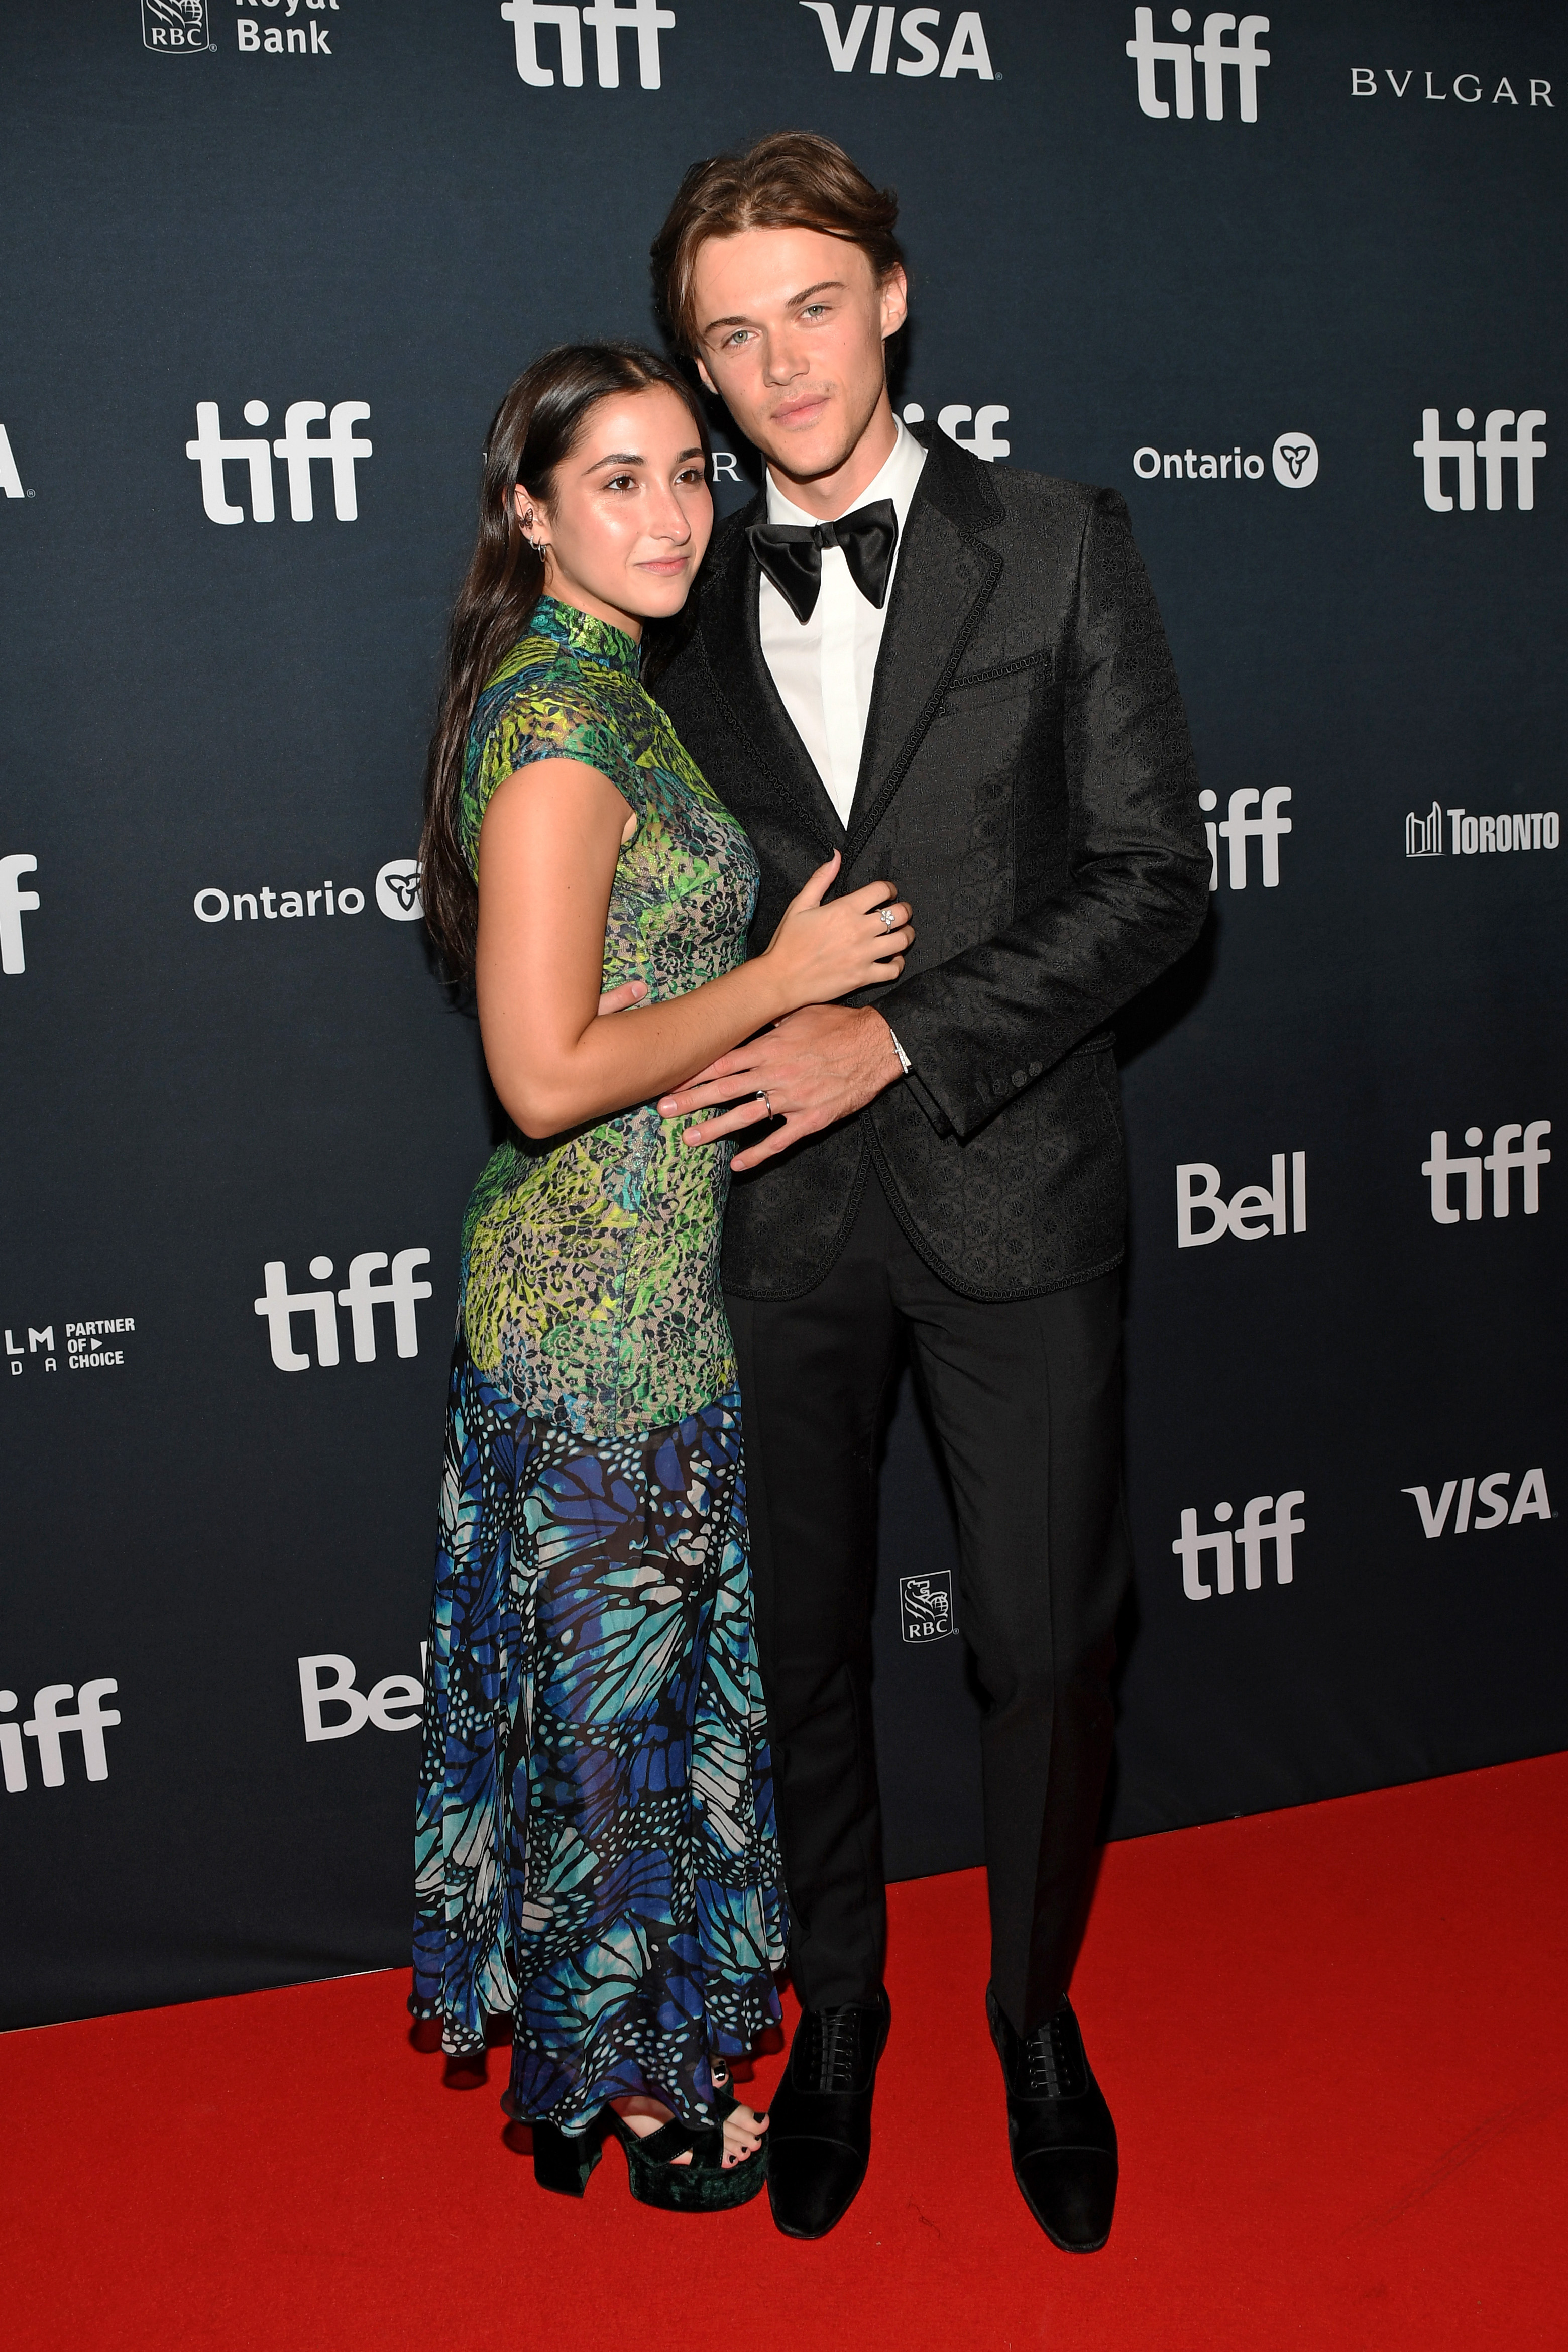 Isabel Machado and Christopher Briney pose at the Closing Night Gala Premiere of "Daliland" at Roy Thomson Hall on September 17, 2022, in Toronto, Ontario | Source: Getty Images